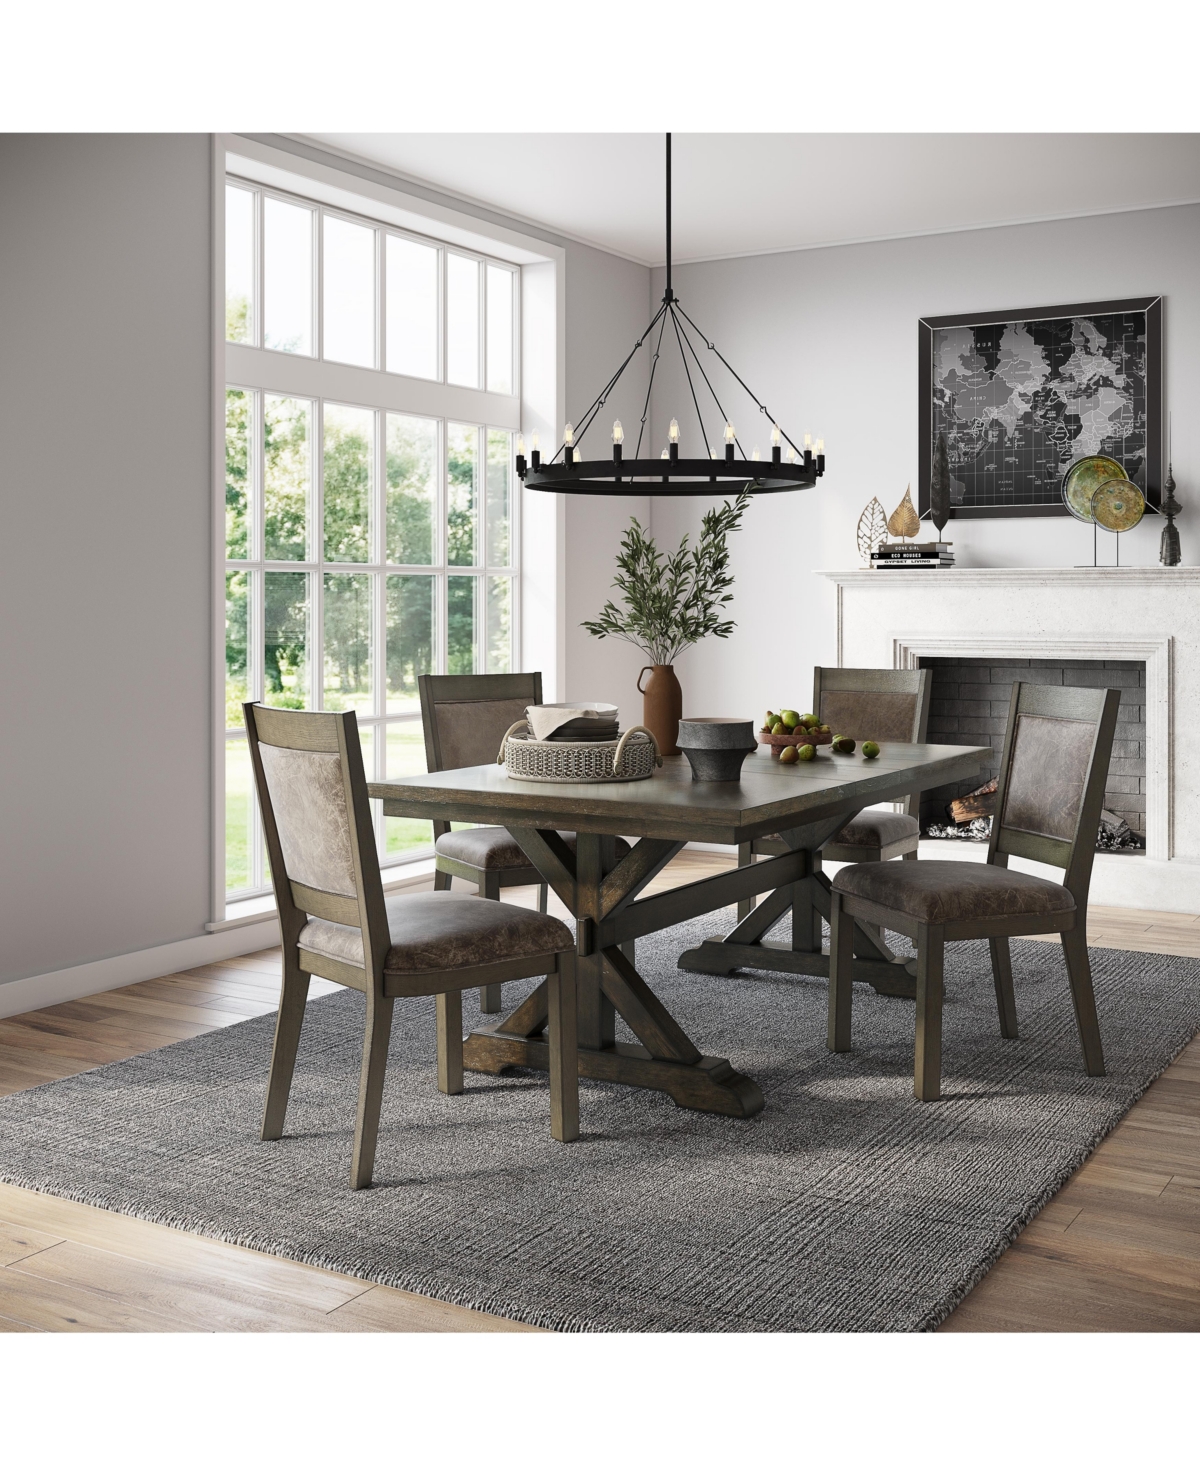 Denman Dining 5-Pc Set (Trestle Table + 4 Side Chairs)